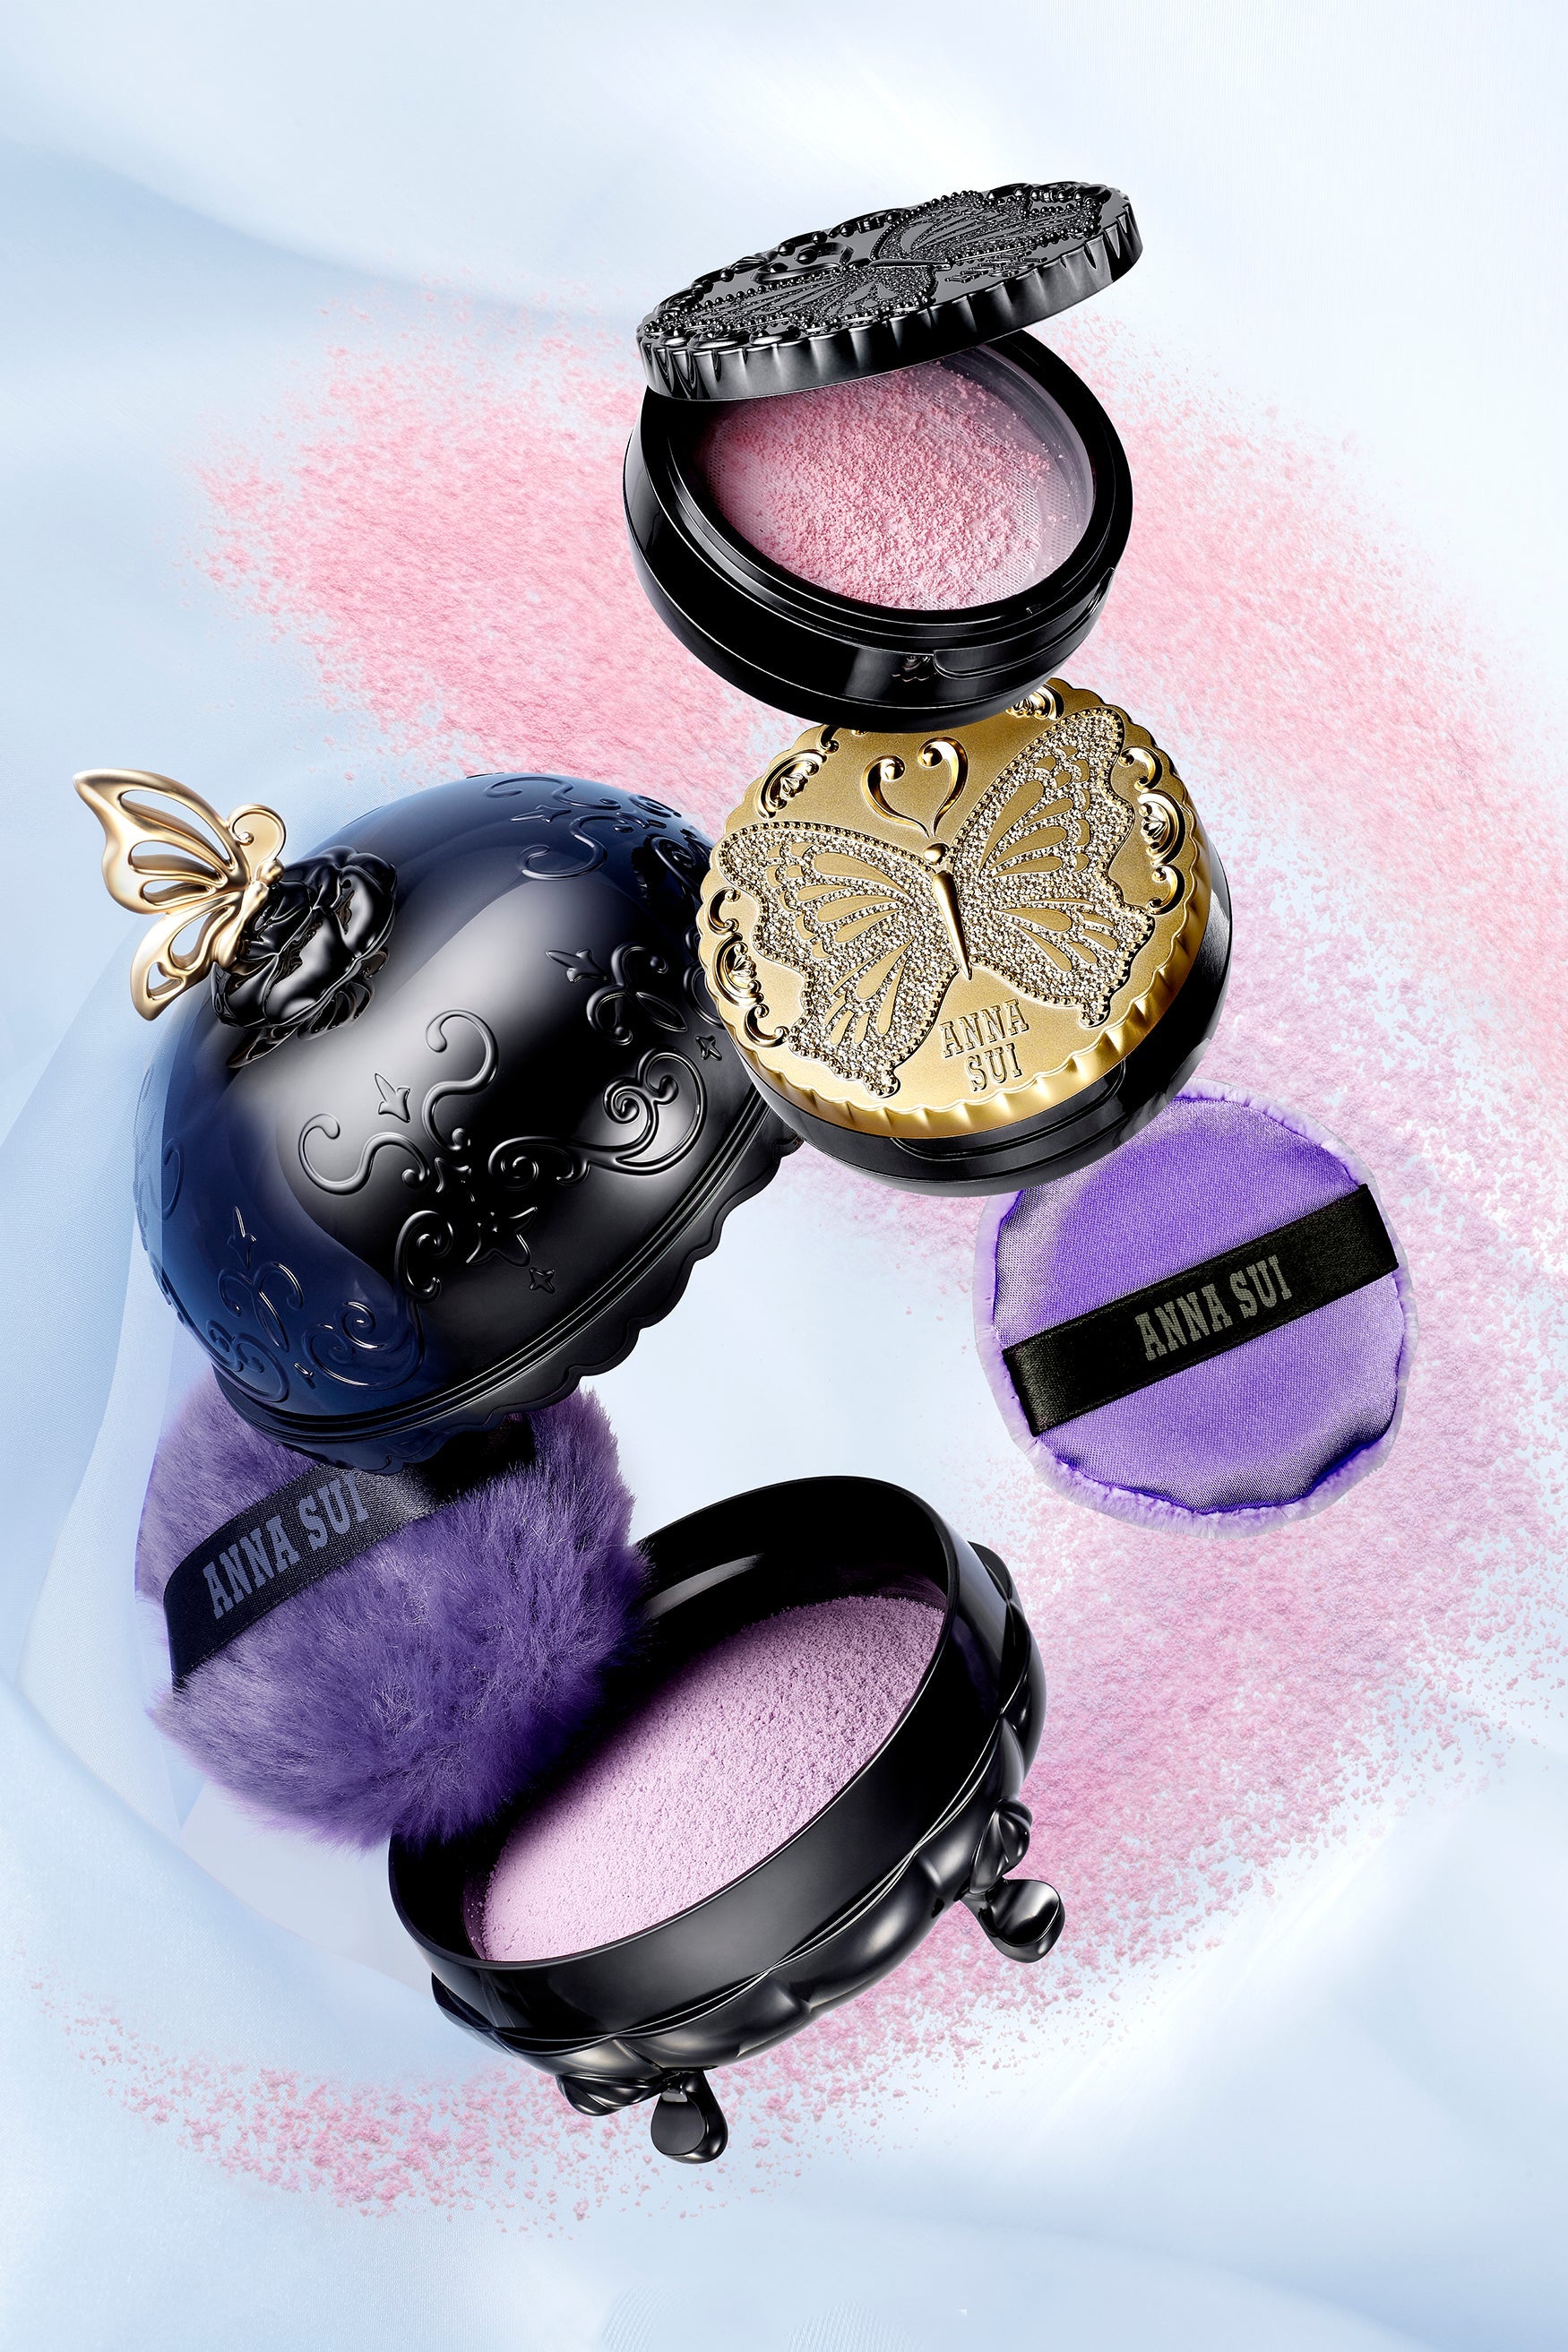 The round purple fluffy powder puff pair it with the Anna Sui Loose Powder for a flawless finish